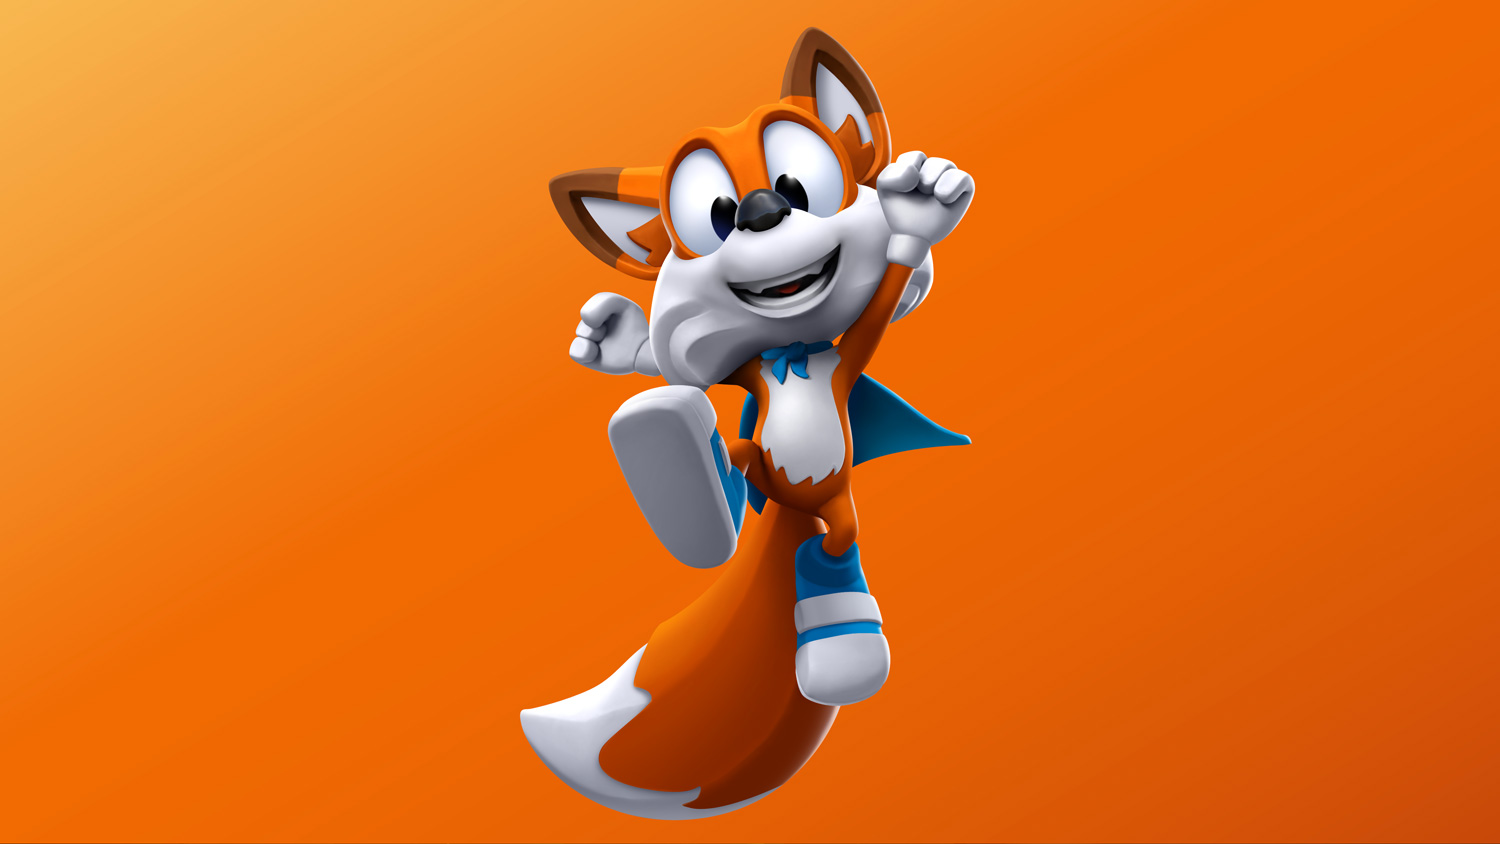 The 3D platformer "Lucky's Tale" was one of the first Oculus Studios titles.